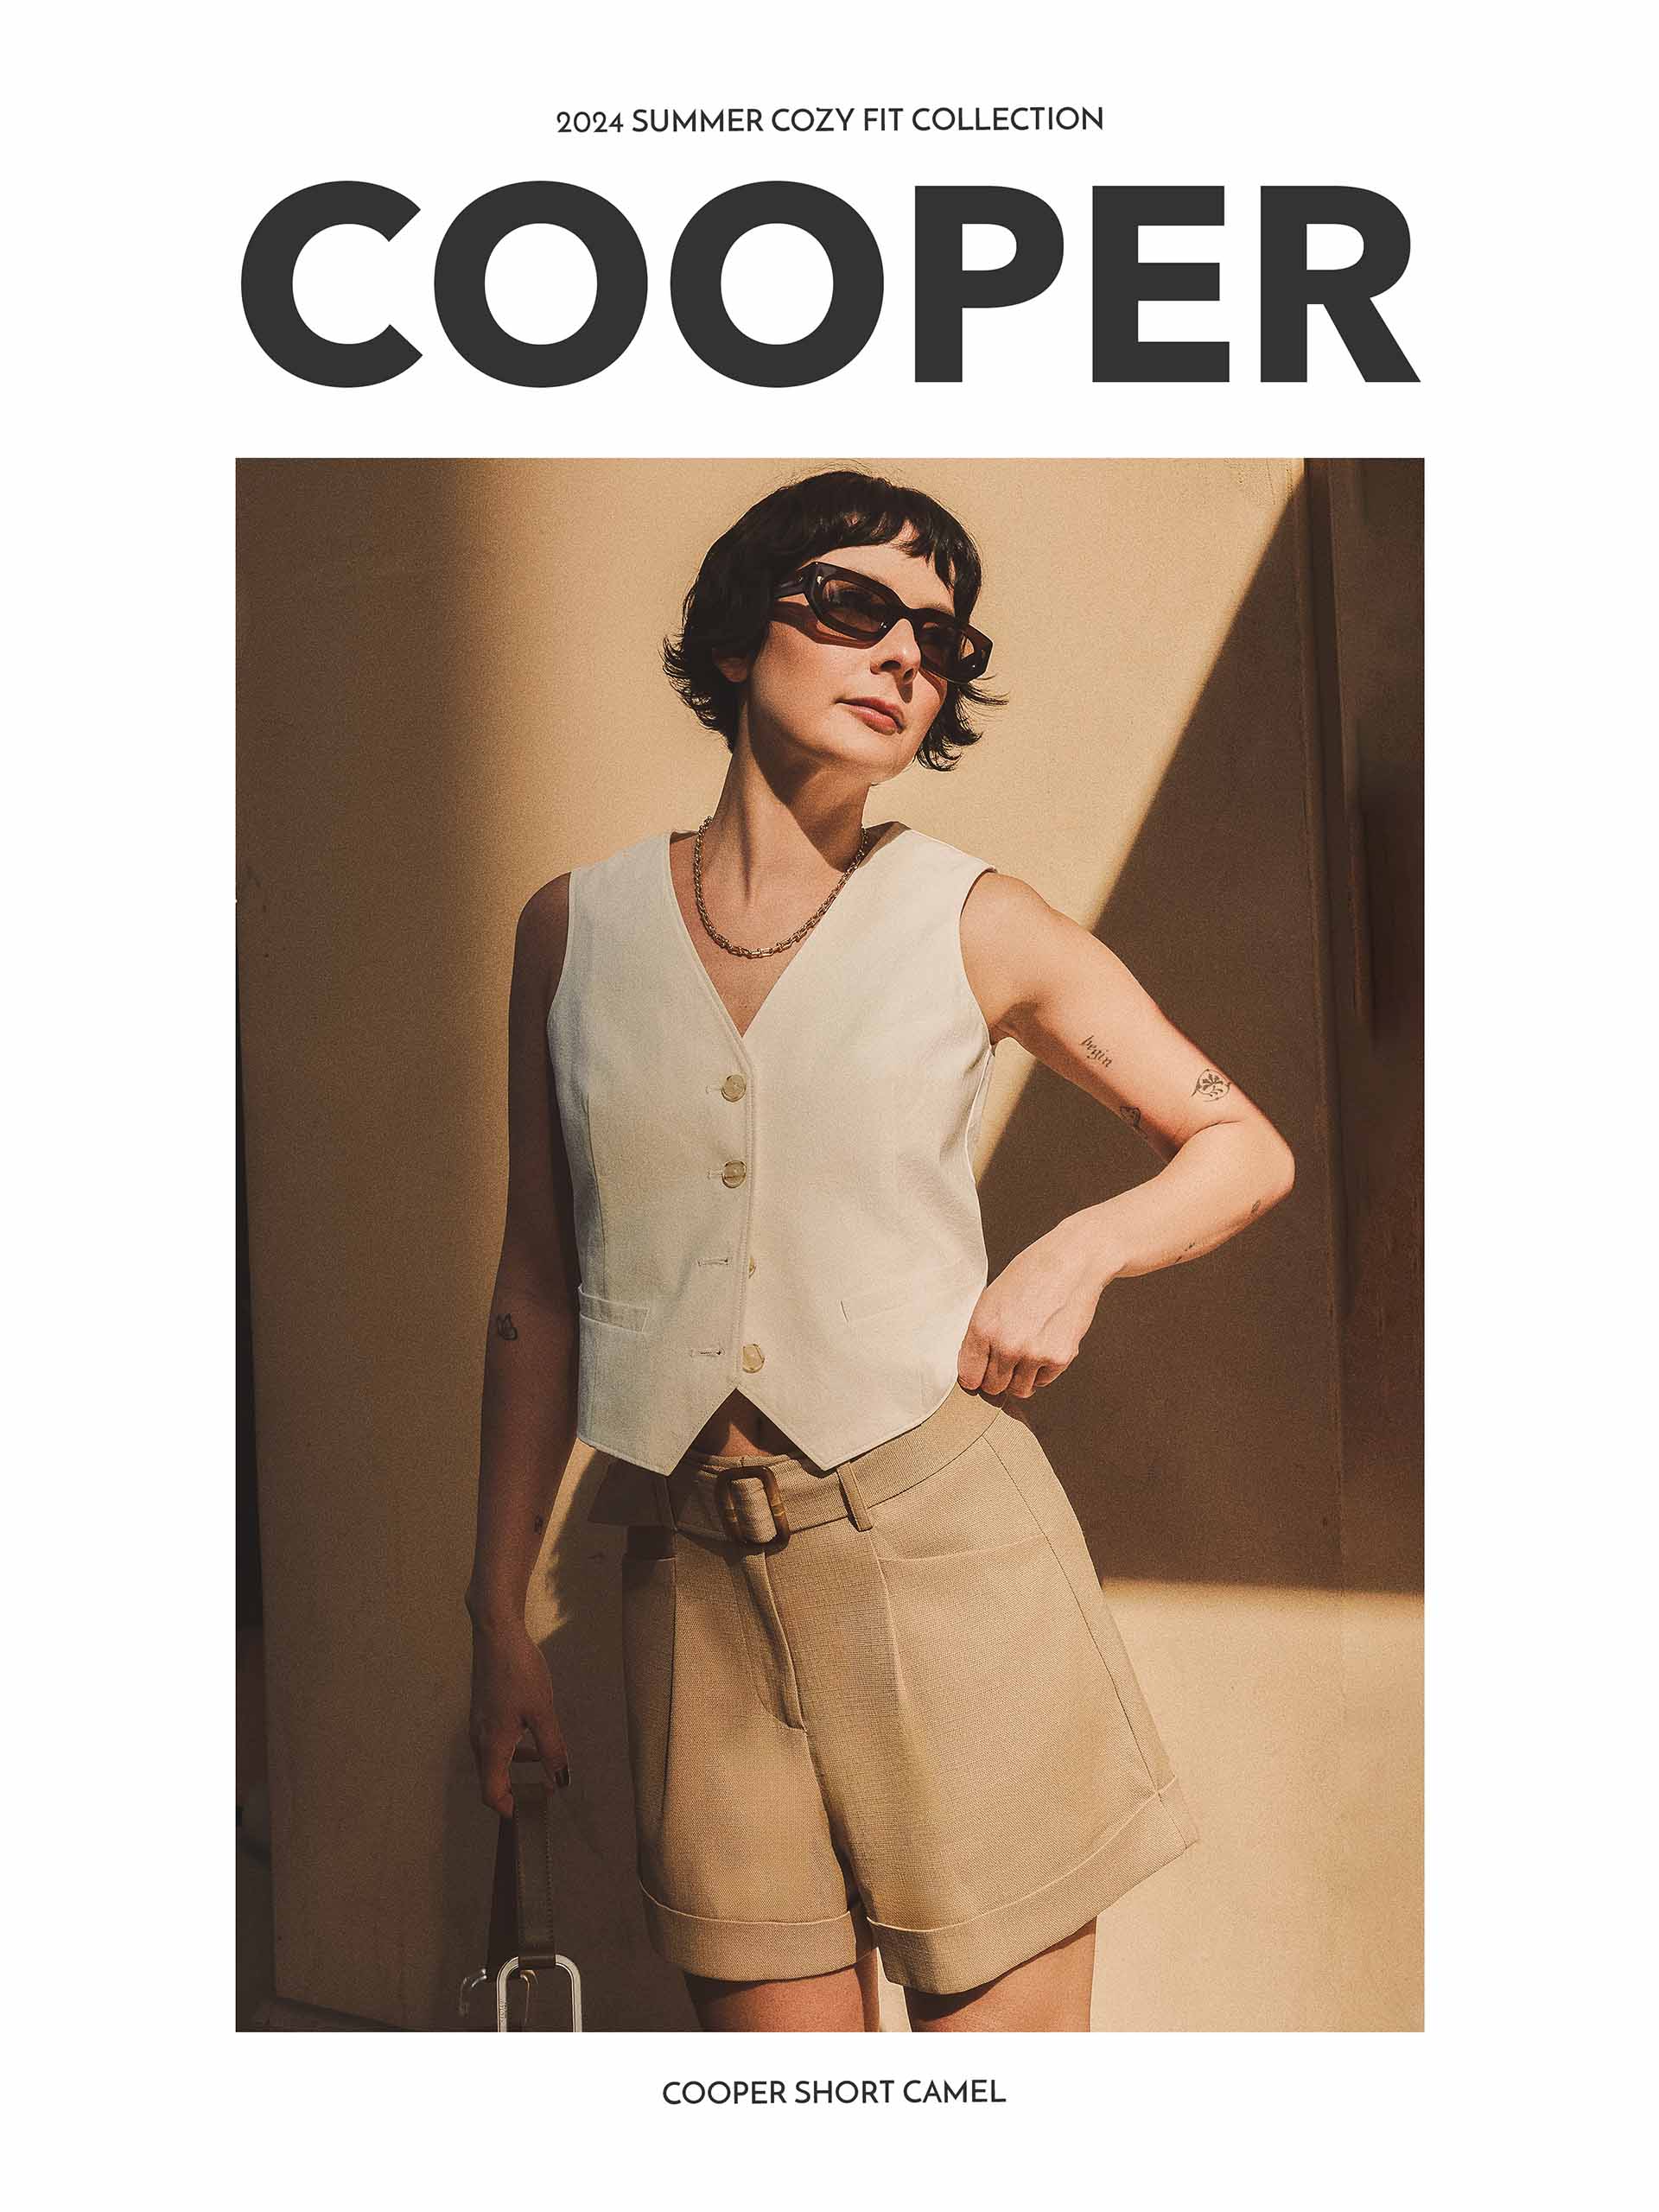 Petite Studio Summer '24 Cozy Fit Collection - Cooper Shorts in Camel